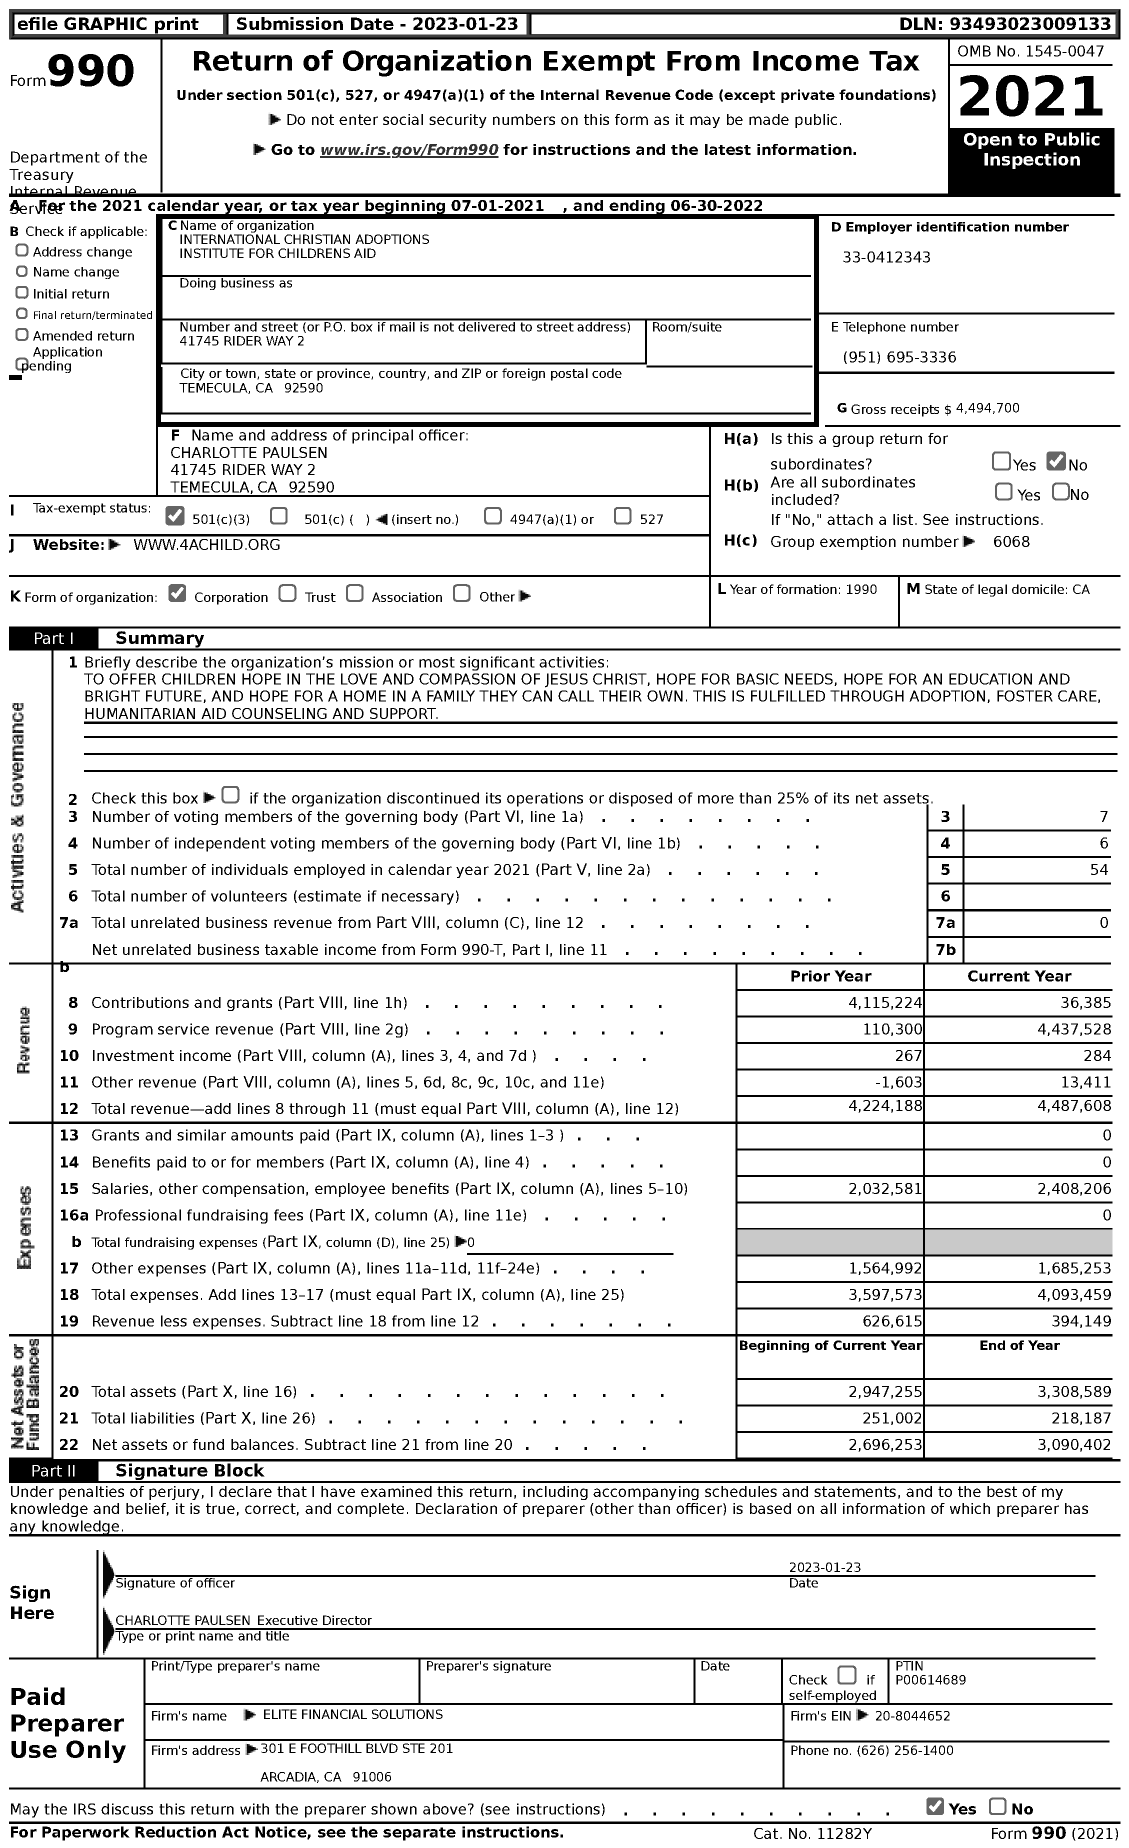 Image of first page of 2021 Form 990 for International Christian Adoptions Institute for Childrens Aid